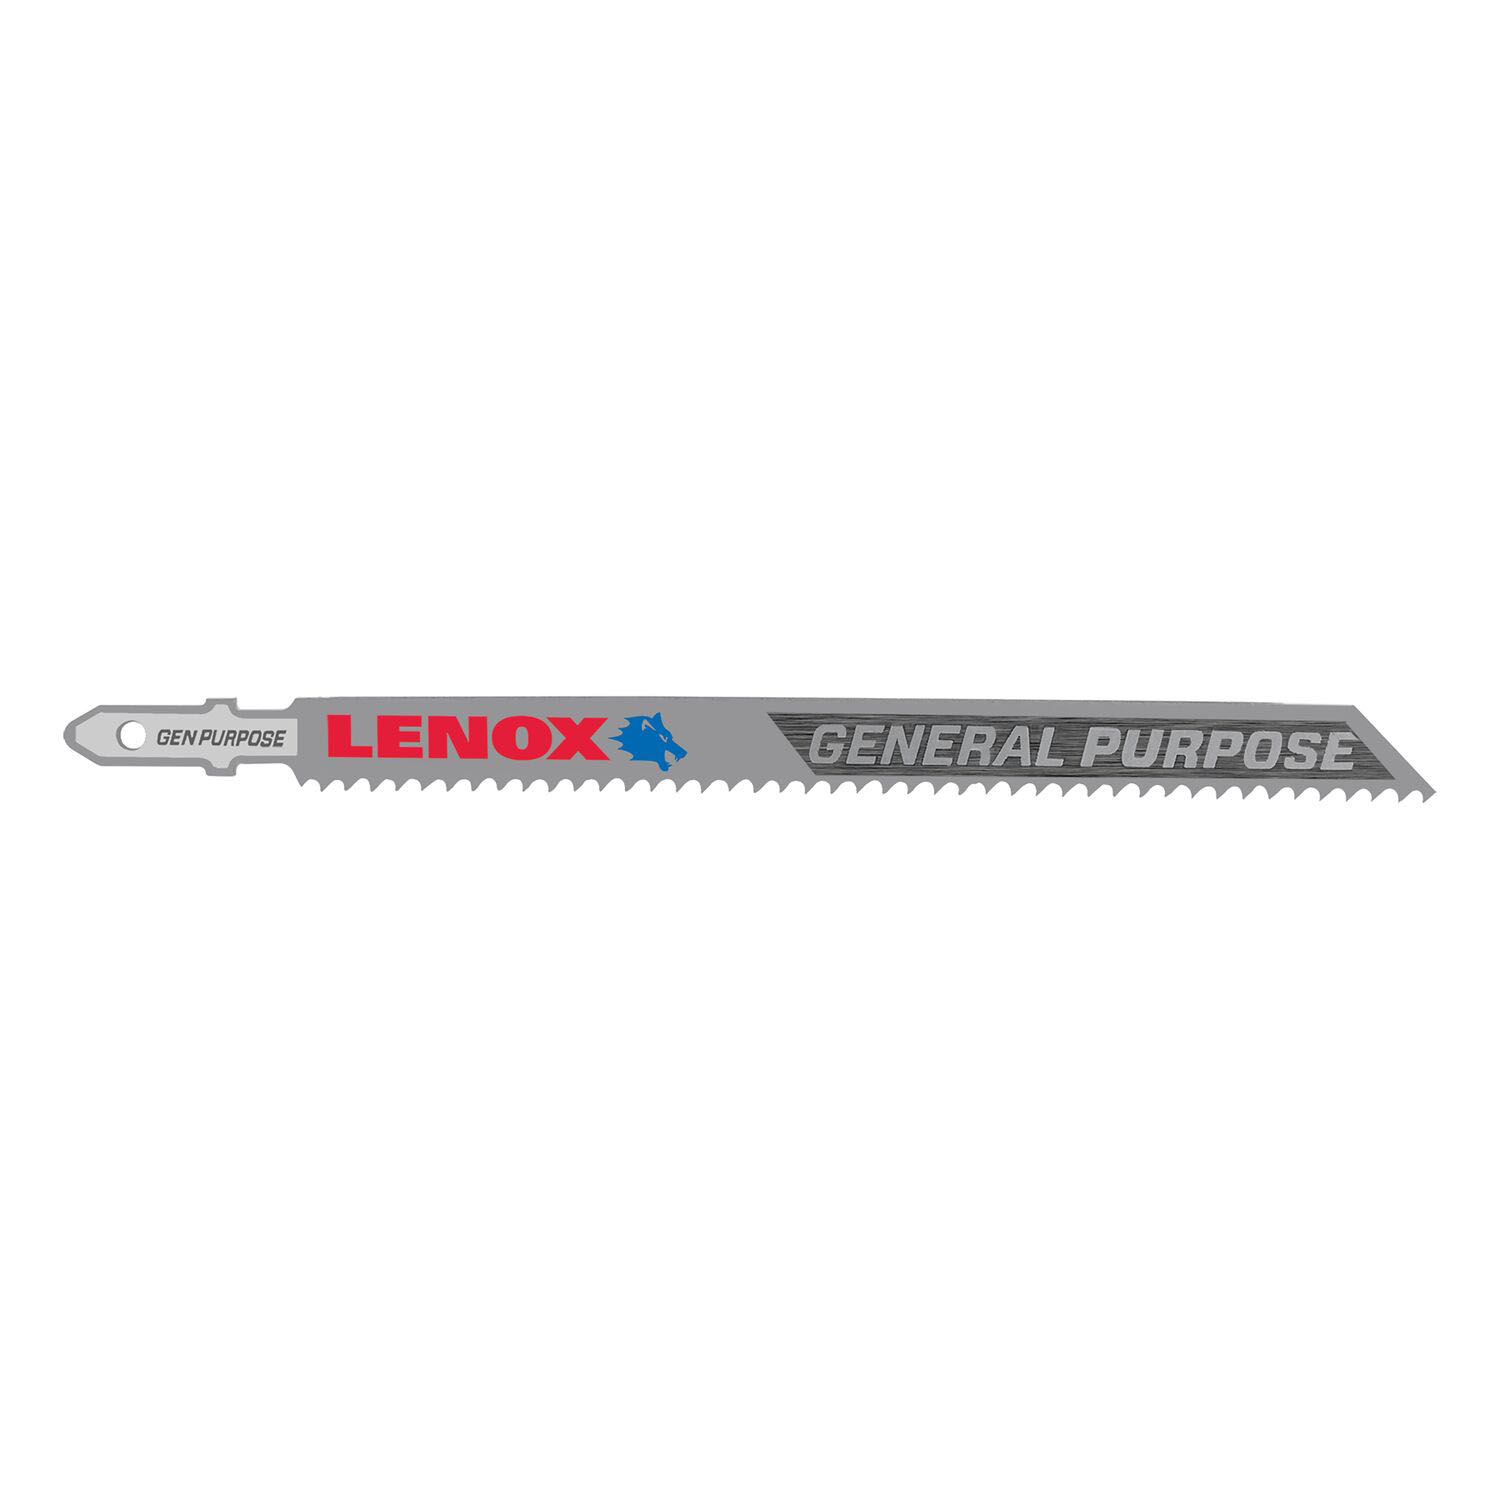 5 PACK 5-1/4 X 3/8 IN. 10 TPI GENERAL PURPOSE JIG SAW BLADES